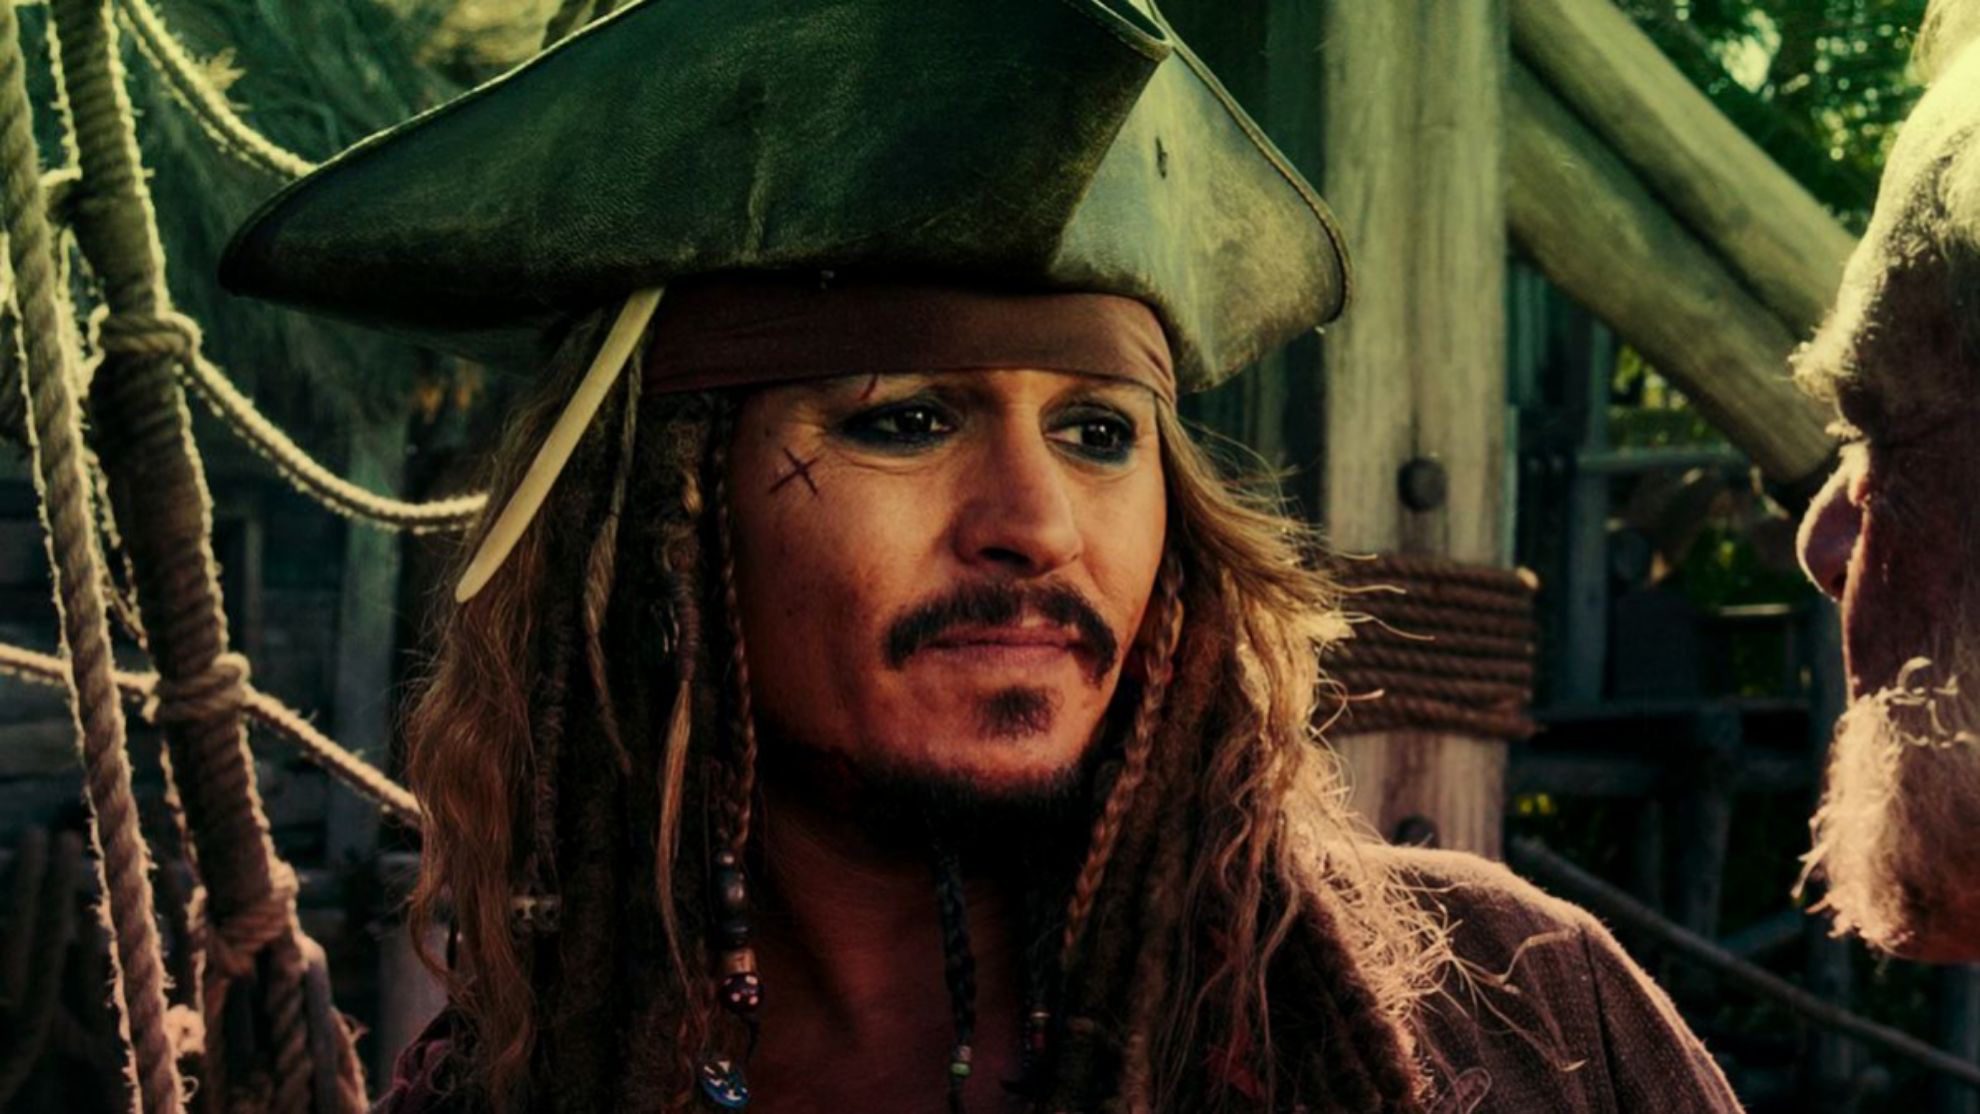 Johnny Depp return to the Pirates of the Caribbean Franchise